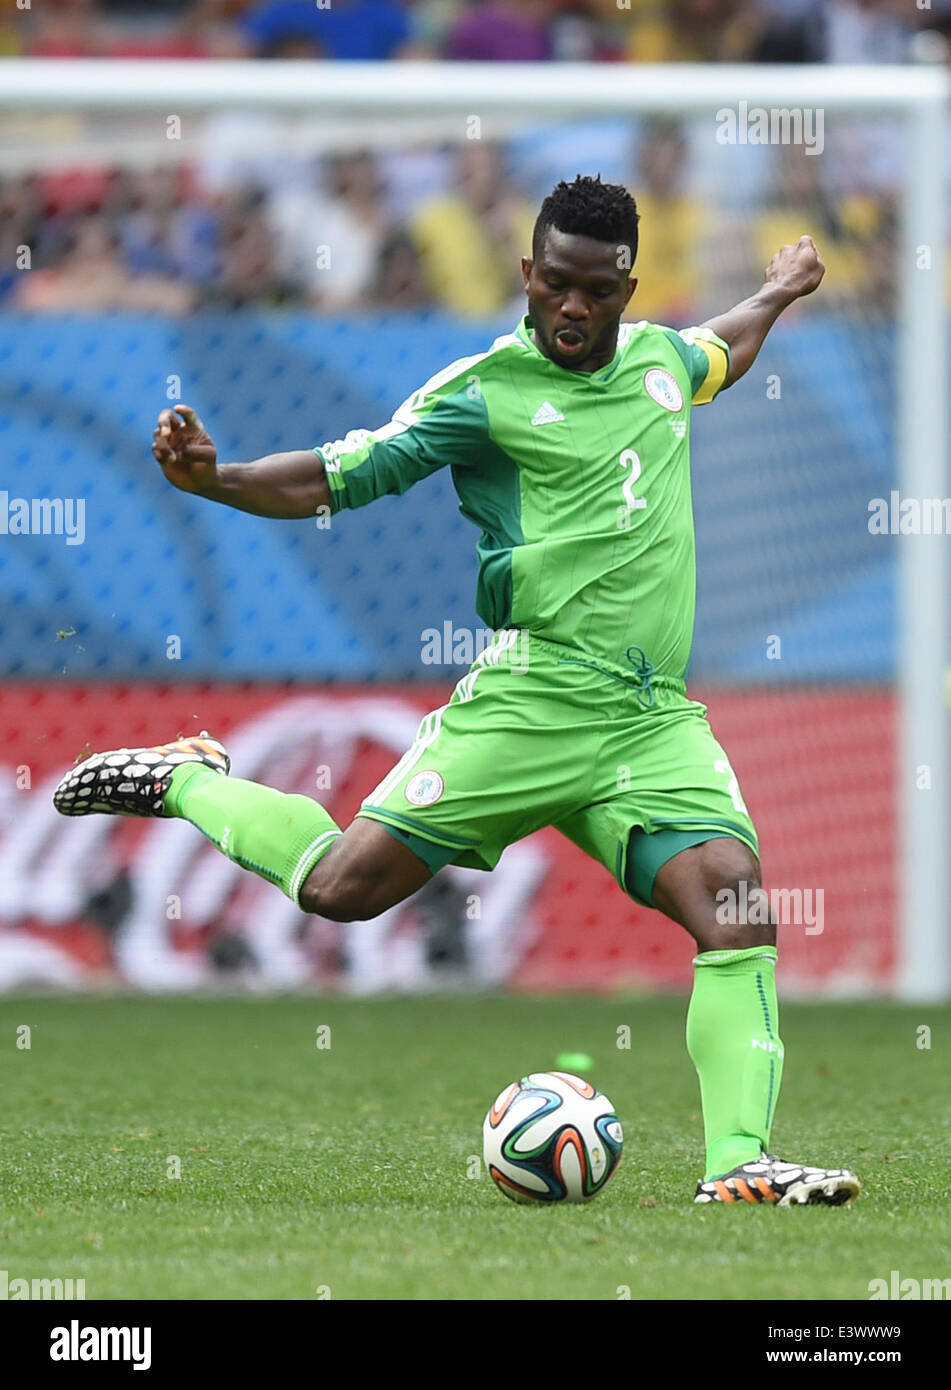 Brasilia, Brazil. 30th June, 2014. Joseph Yobo of Nigeria in action during the FIFA World Cup 2014 round of 16 match between France and Nigeria at the Estadio National Stadium in Brasilia, Brazil, on 30 June 2014. Credit:  dpa picture alliance/Alamy Live News Stock Photo